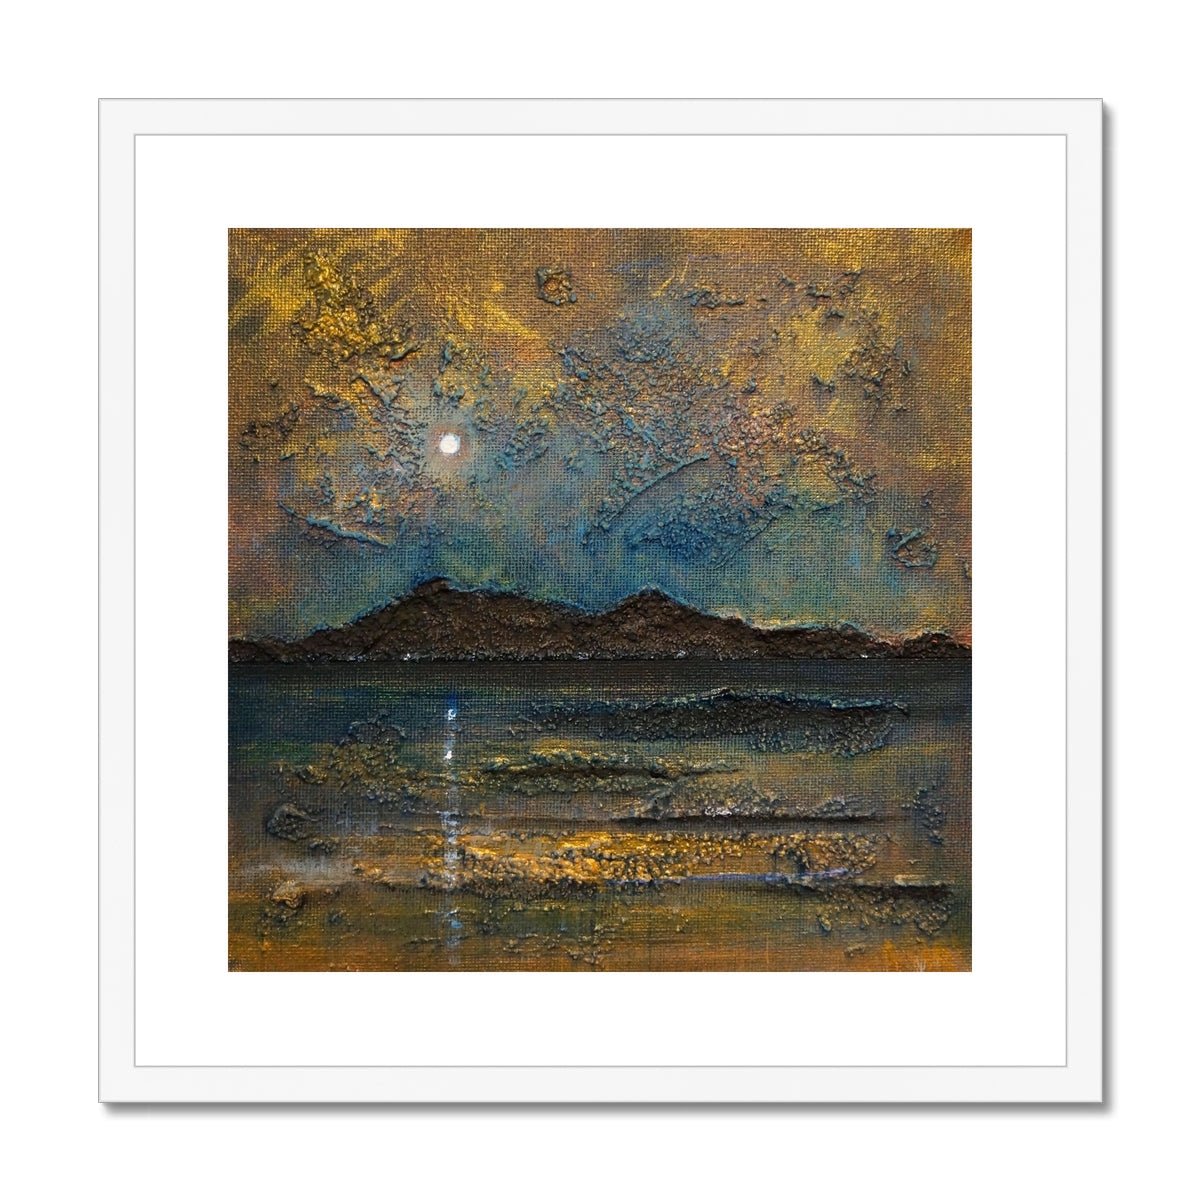 Arran Moonlight Painting | Framed & Mounted Prints From Scotland-Framed & Mounted Prints-Arran Art Gallery-20"x20"-White Frame-Paintings, Prints, Homeware, Art Gifts From Scotland By Scottish Artist Kevin Hunter